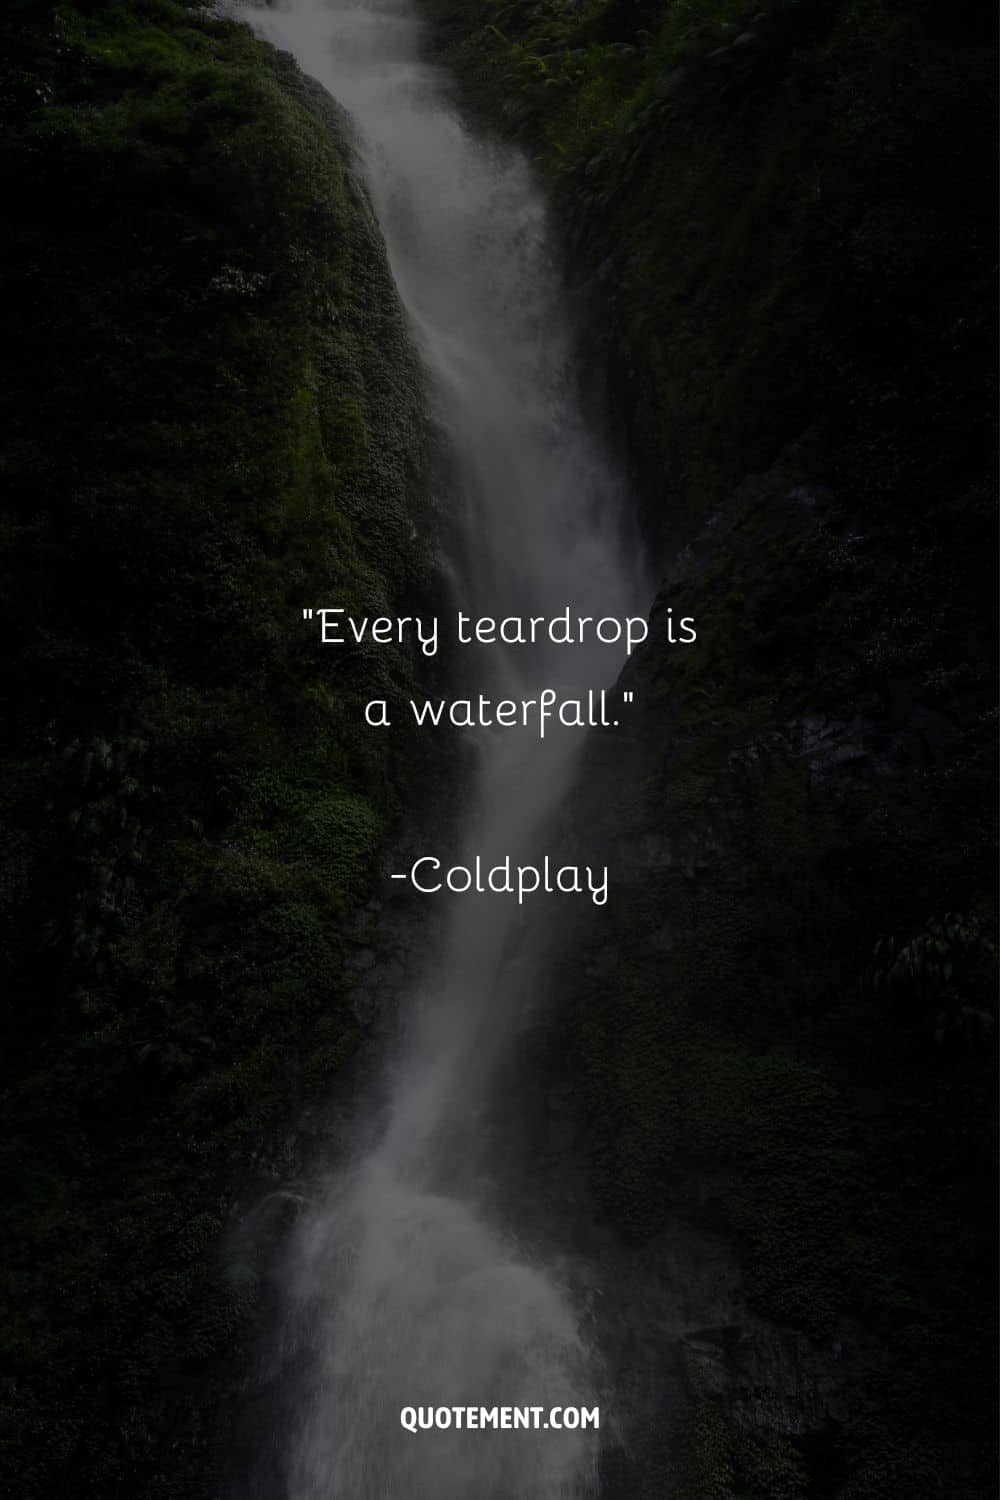 Powerful quote by Coldplay and a waterfall in the background
